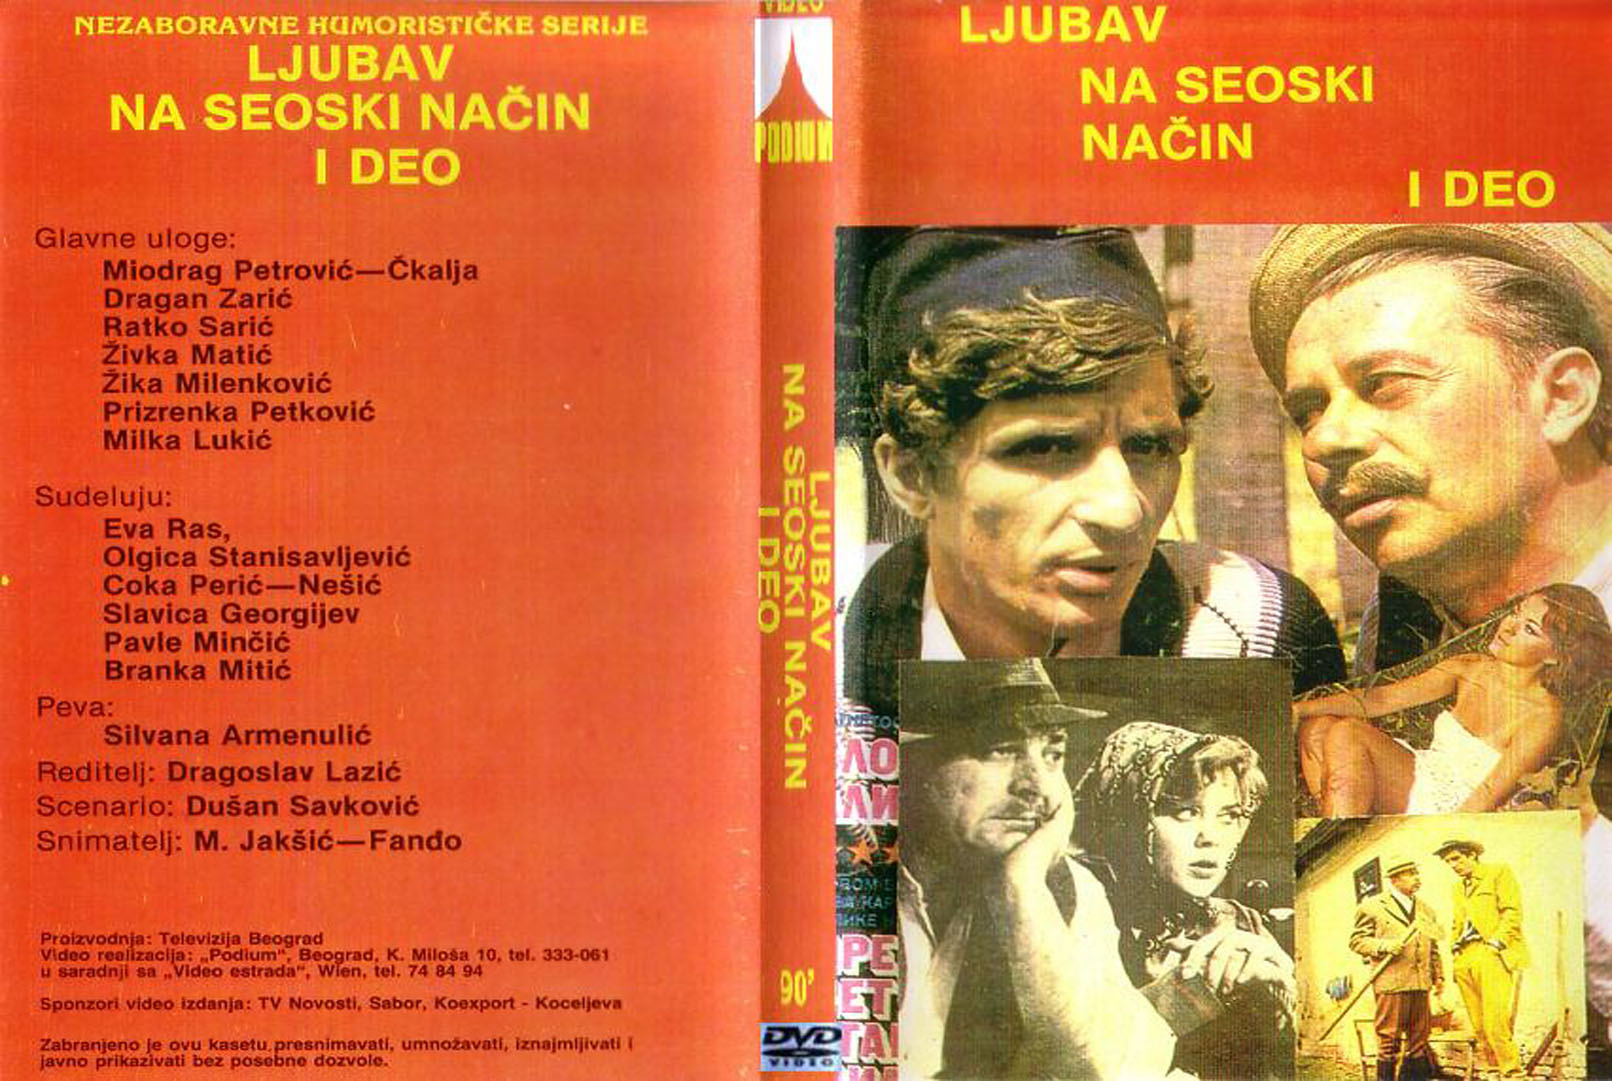 Click to view full size image -  DVD Cover - L - ljubav_na_seoski_nacin_1_dvd - ljubav_na_seoski_nacin_1_dvd.jpg